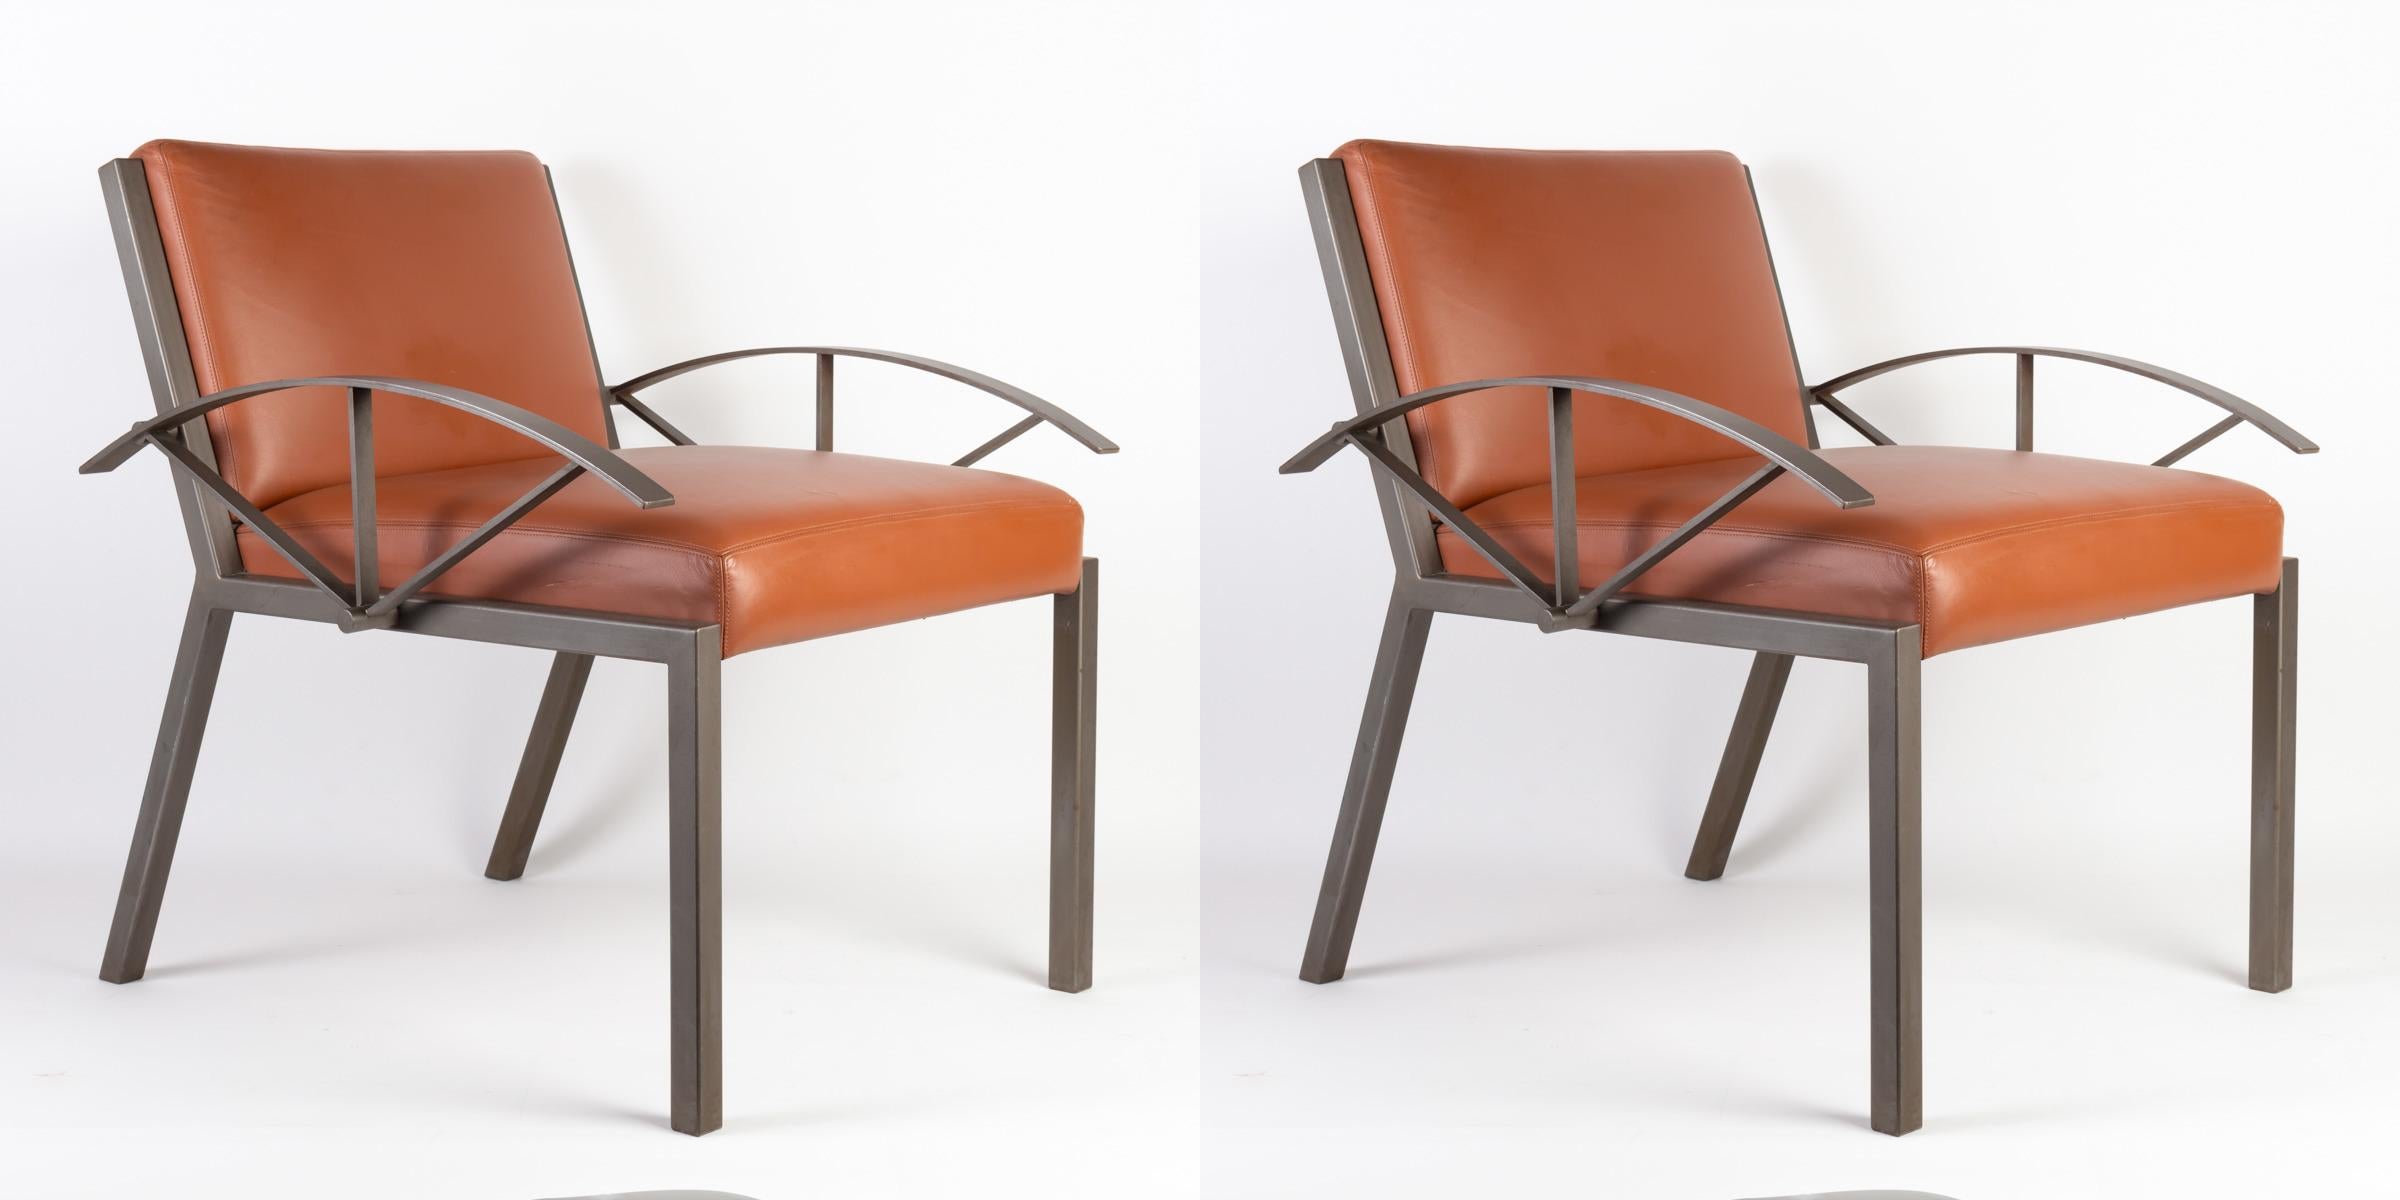 Mid-Century Modern Jean-Michelle Wilmotte, 1956-1989, 2 Armchairs and 4 Chairs